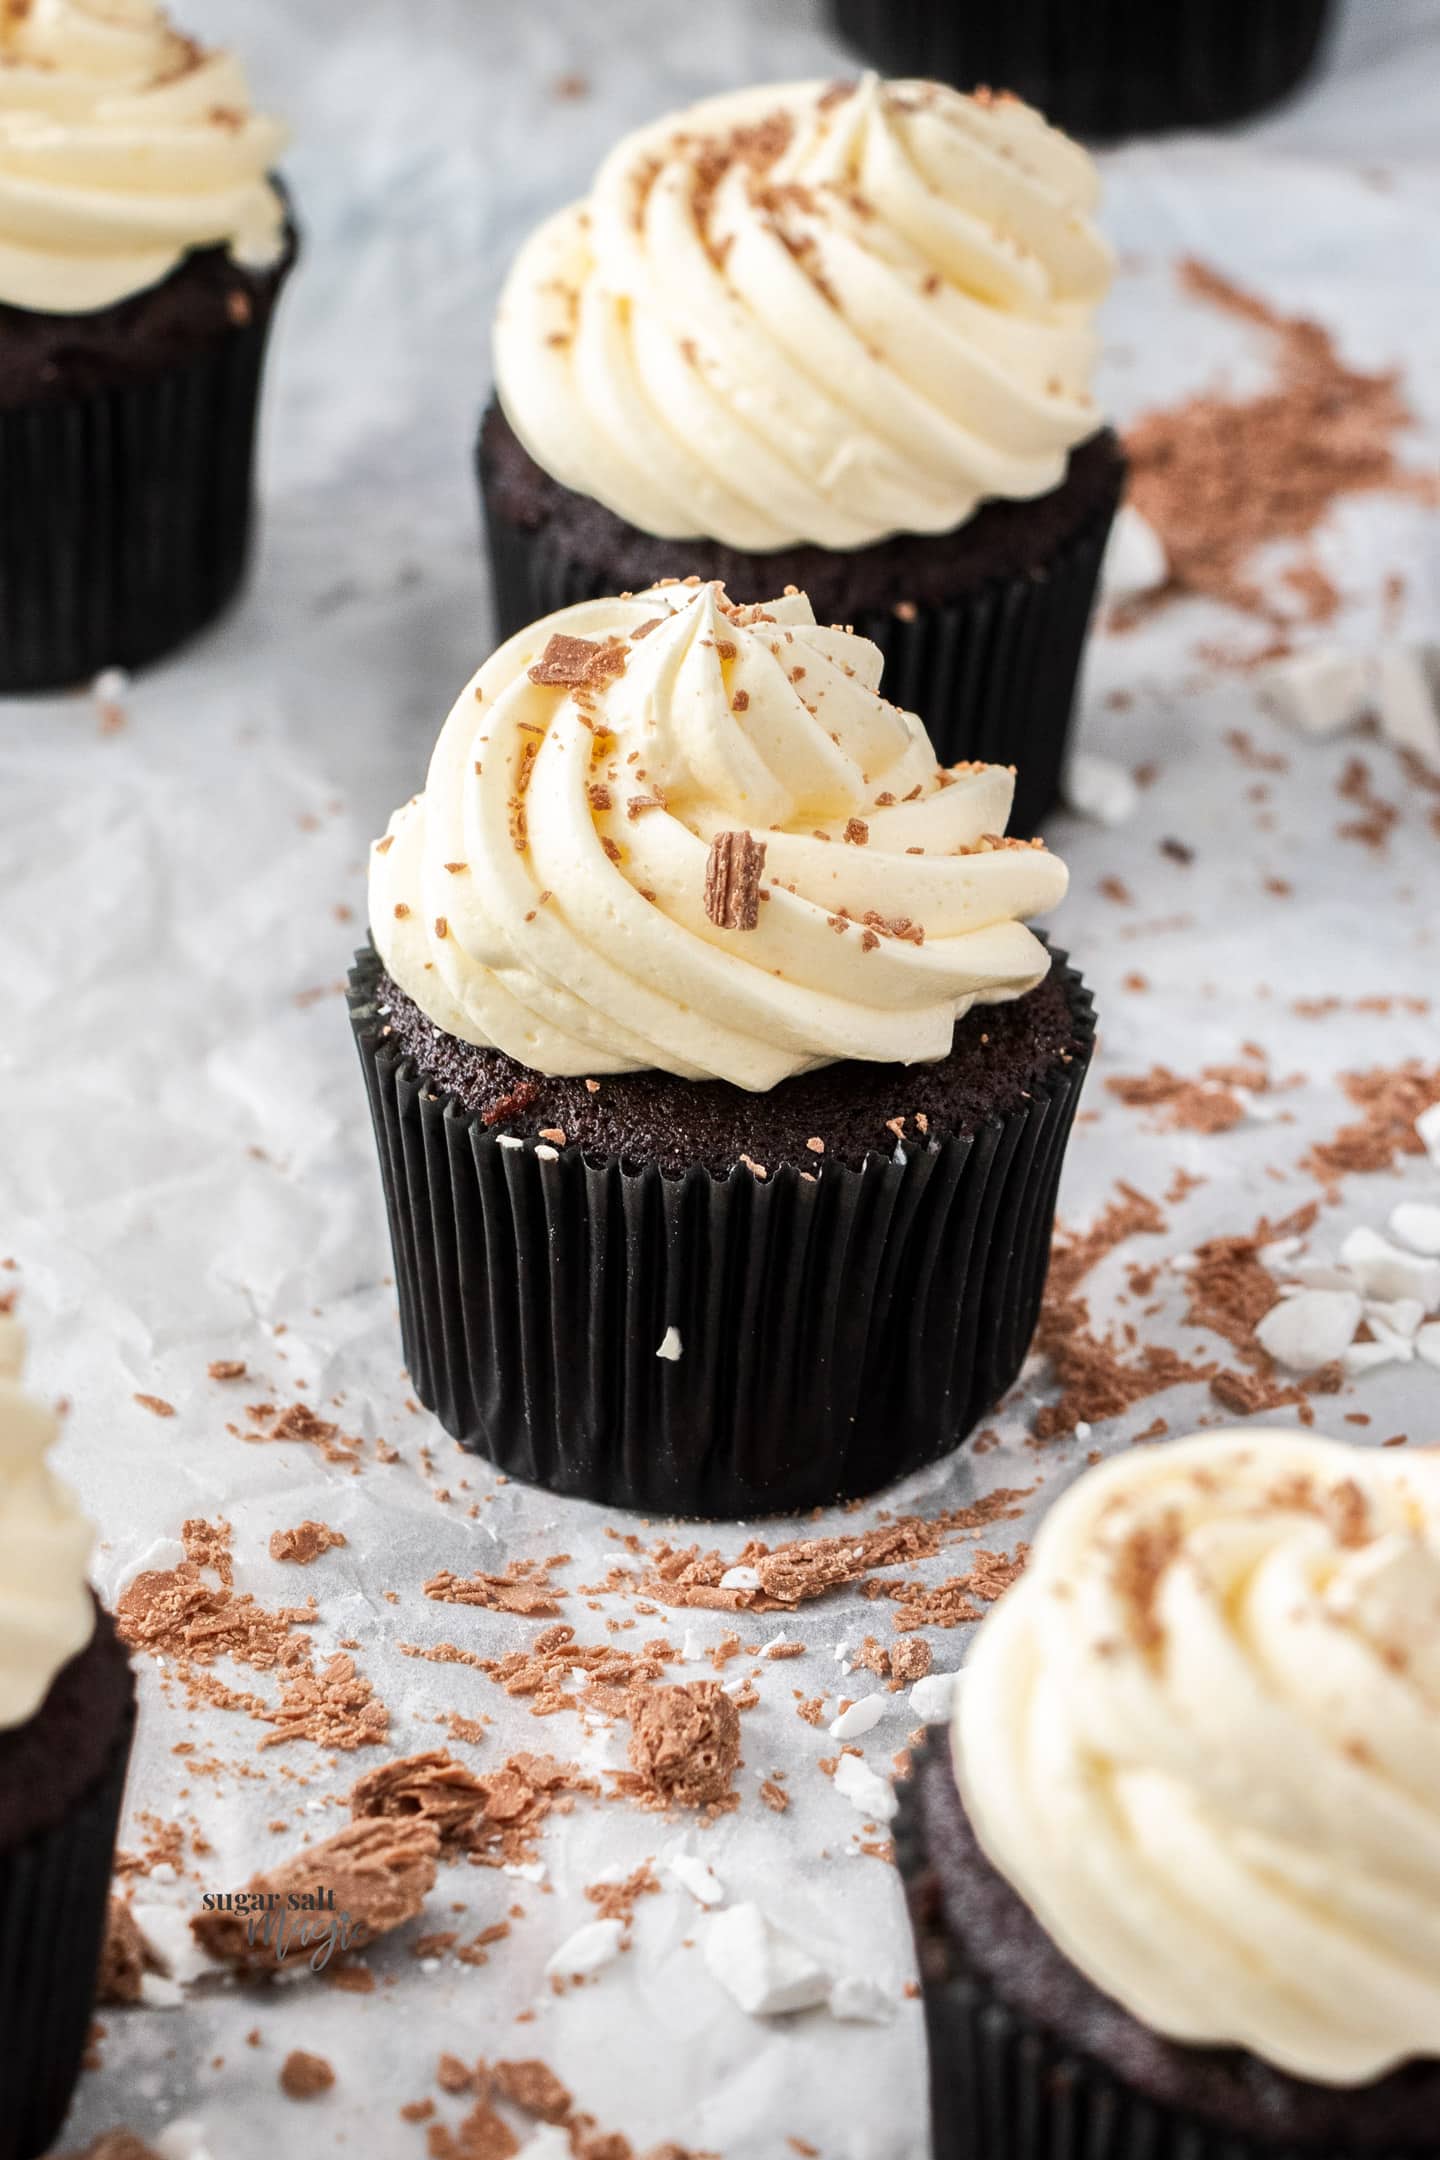 A chocolate cupcake topped with a swirl of buttercream.